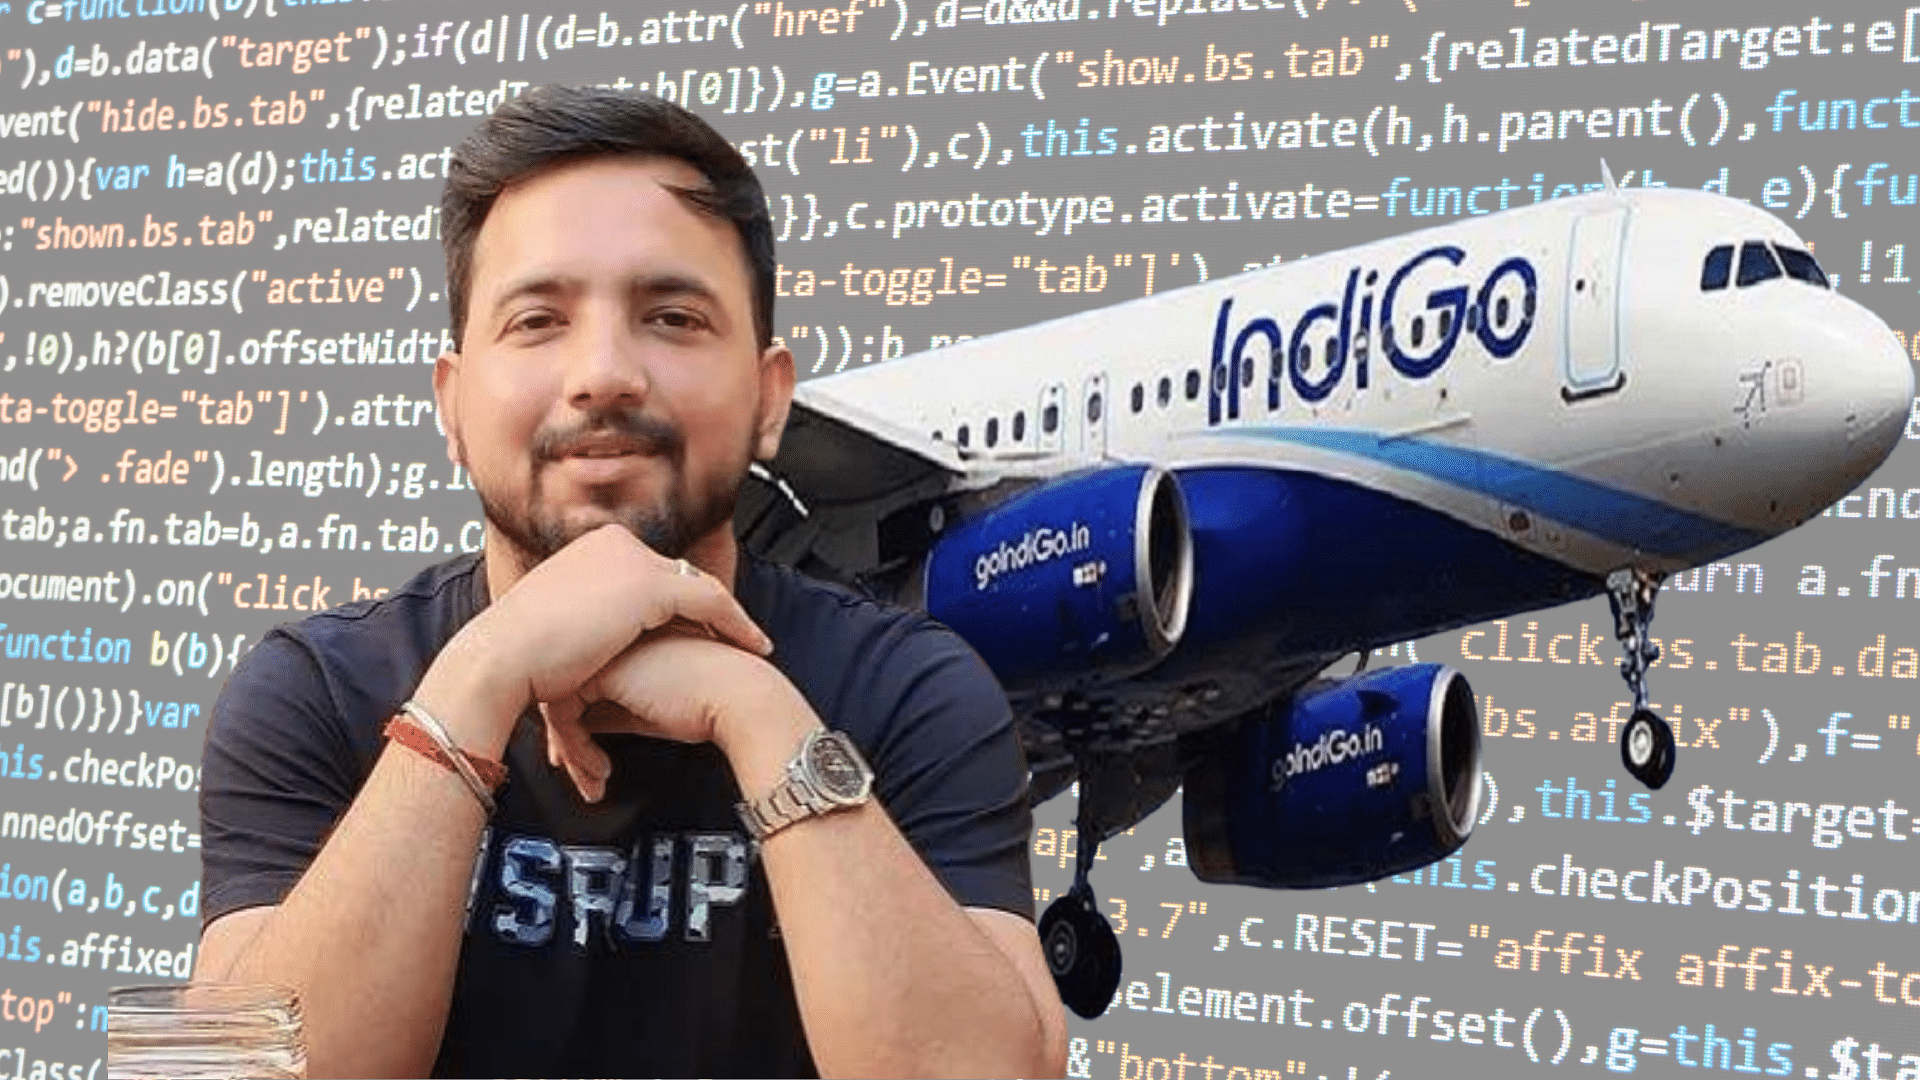 How a Man “Hacked” Indigo's Website to Find His Lost Luggage